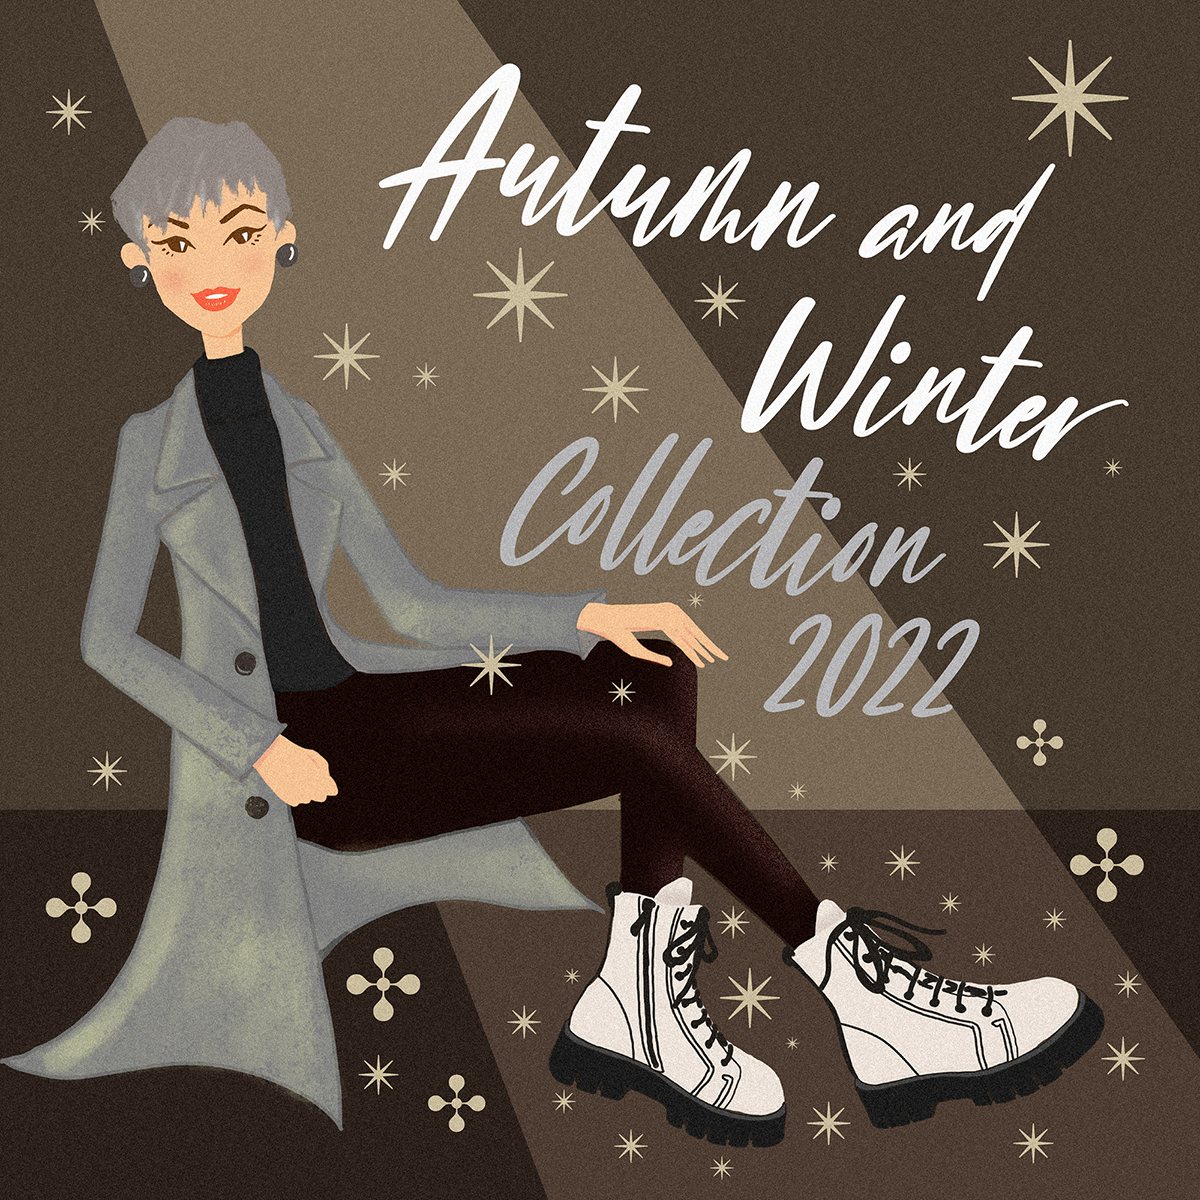 Orthofits “Autumn and Winter Collection 2022”